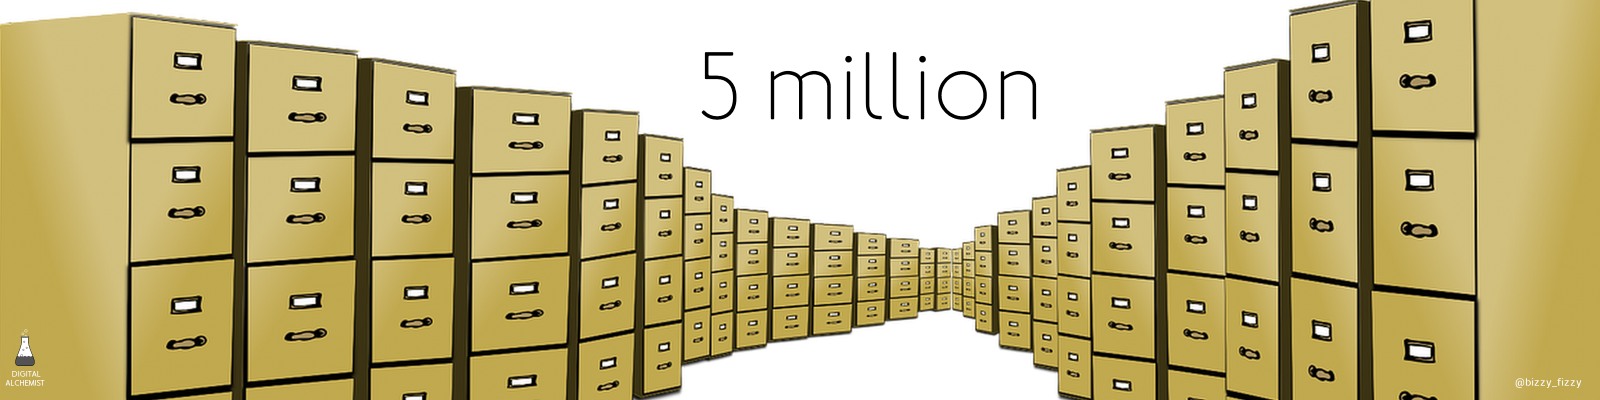 5 million filing cabinets - email spam